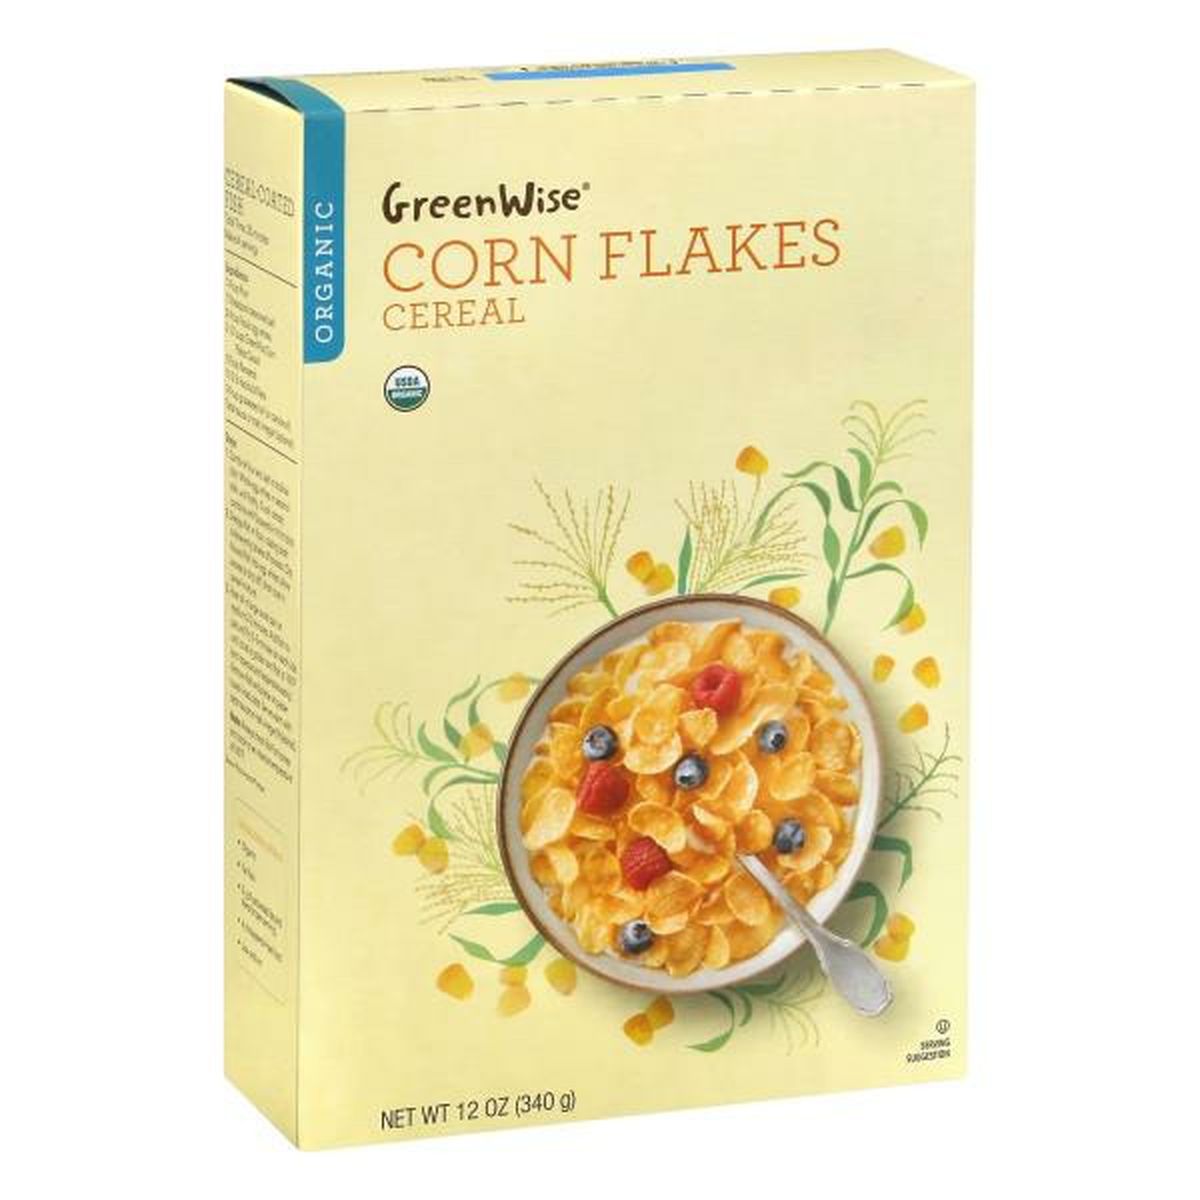 GreenWise Oatmeal Flakes Honey Toasted Cereal 16 oz BOX